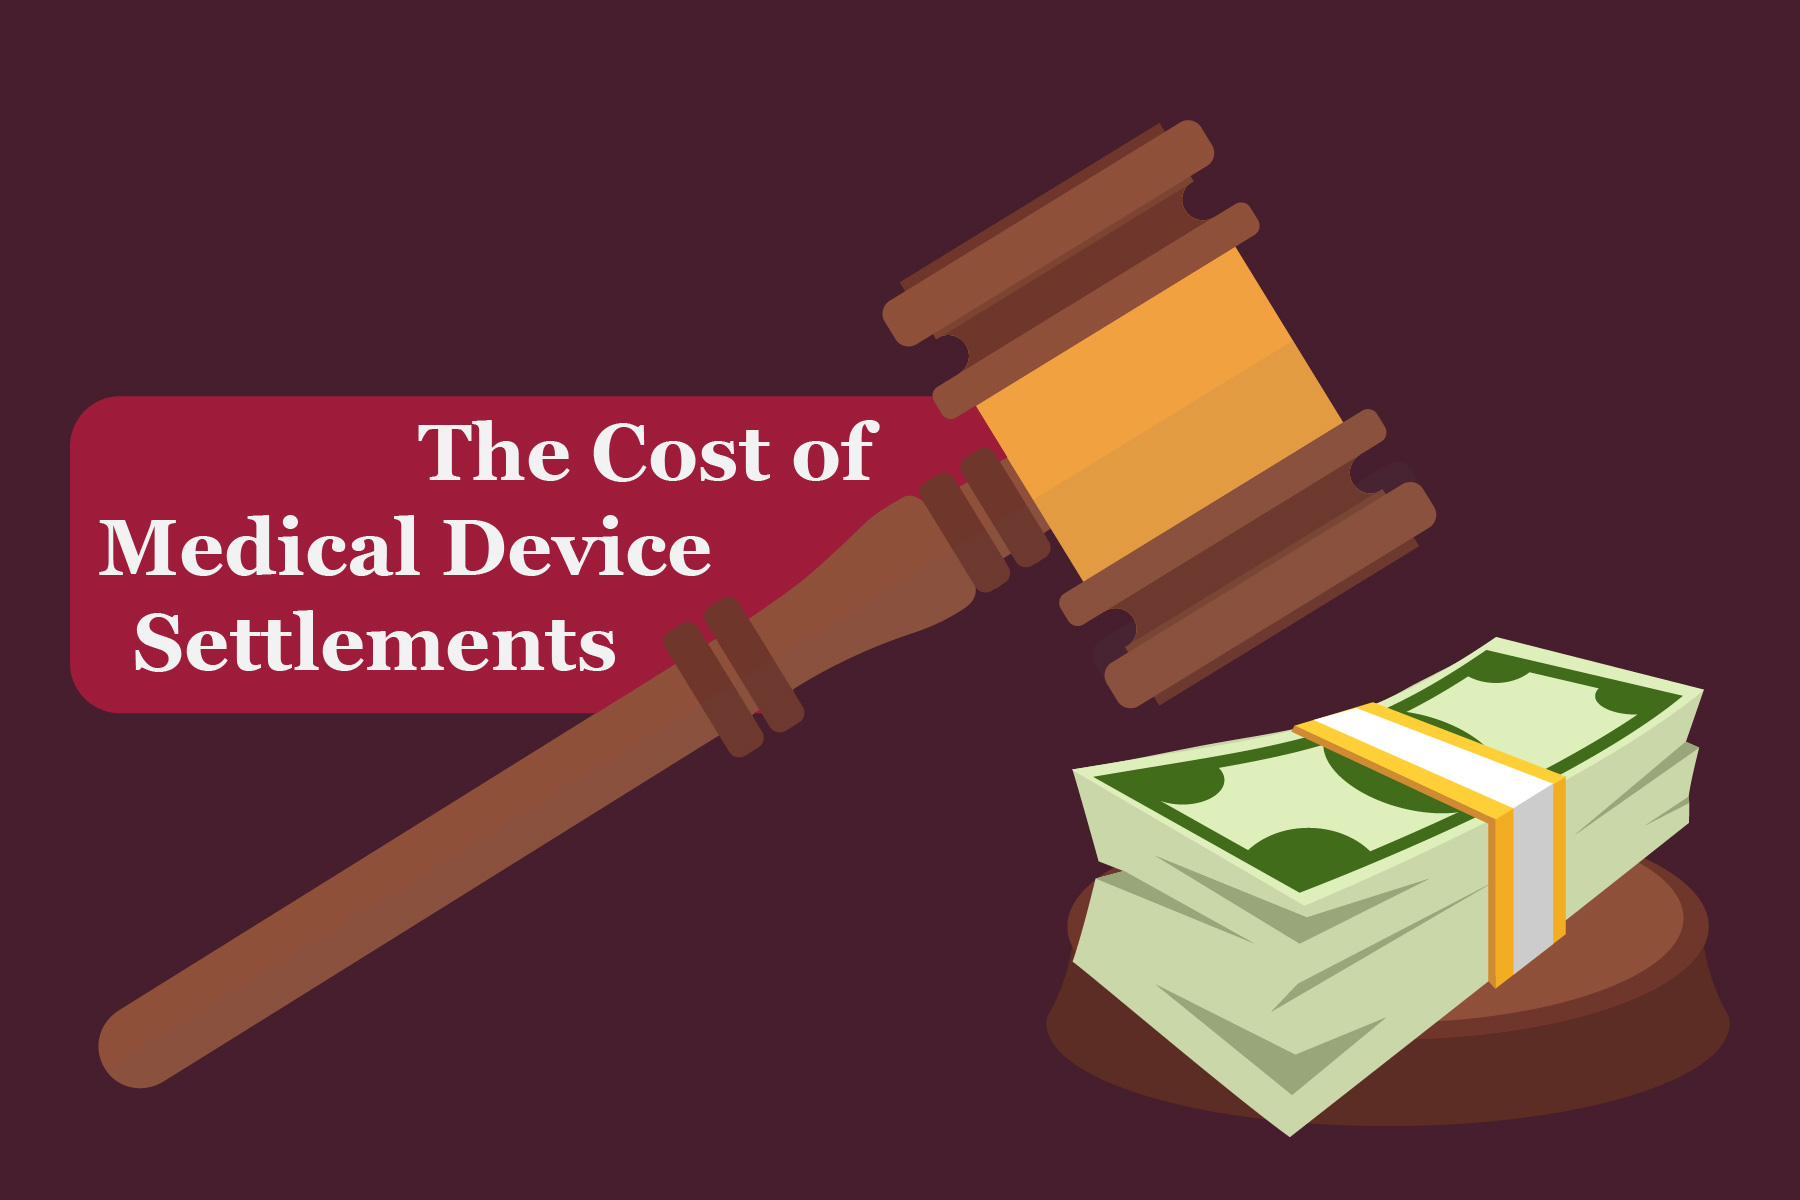 The Cost of Medical Device Settlements